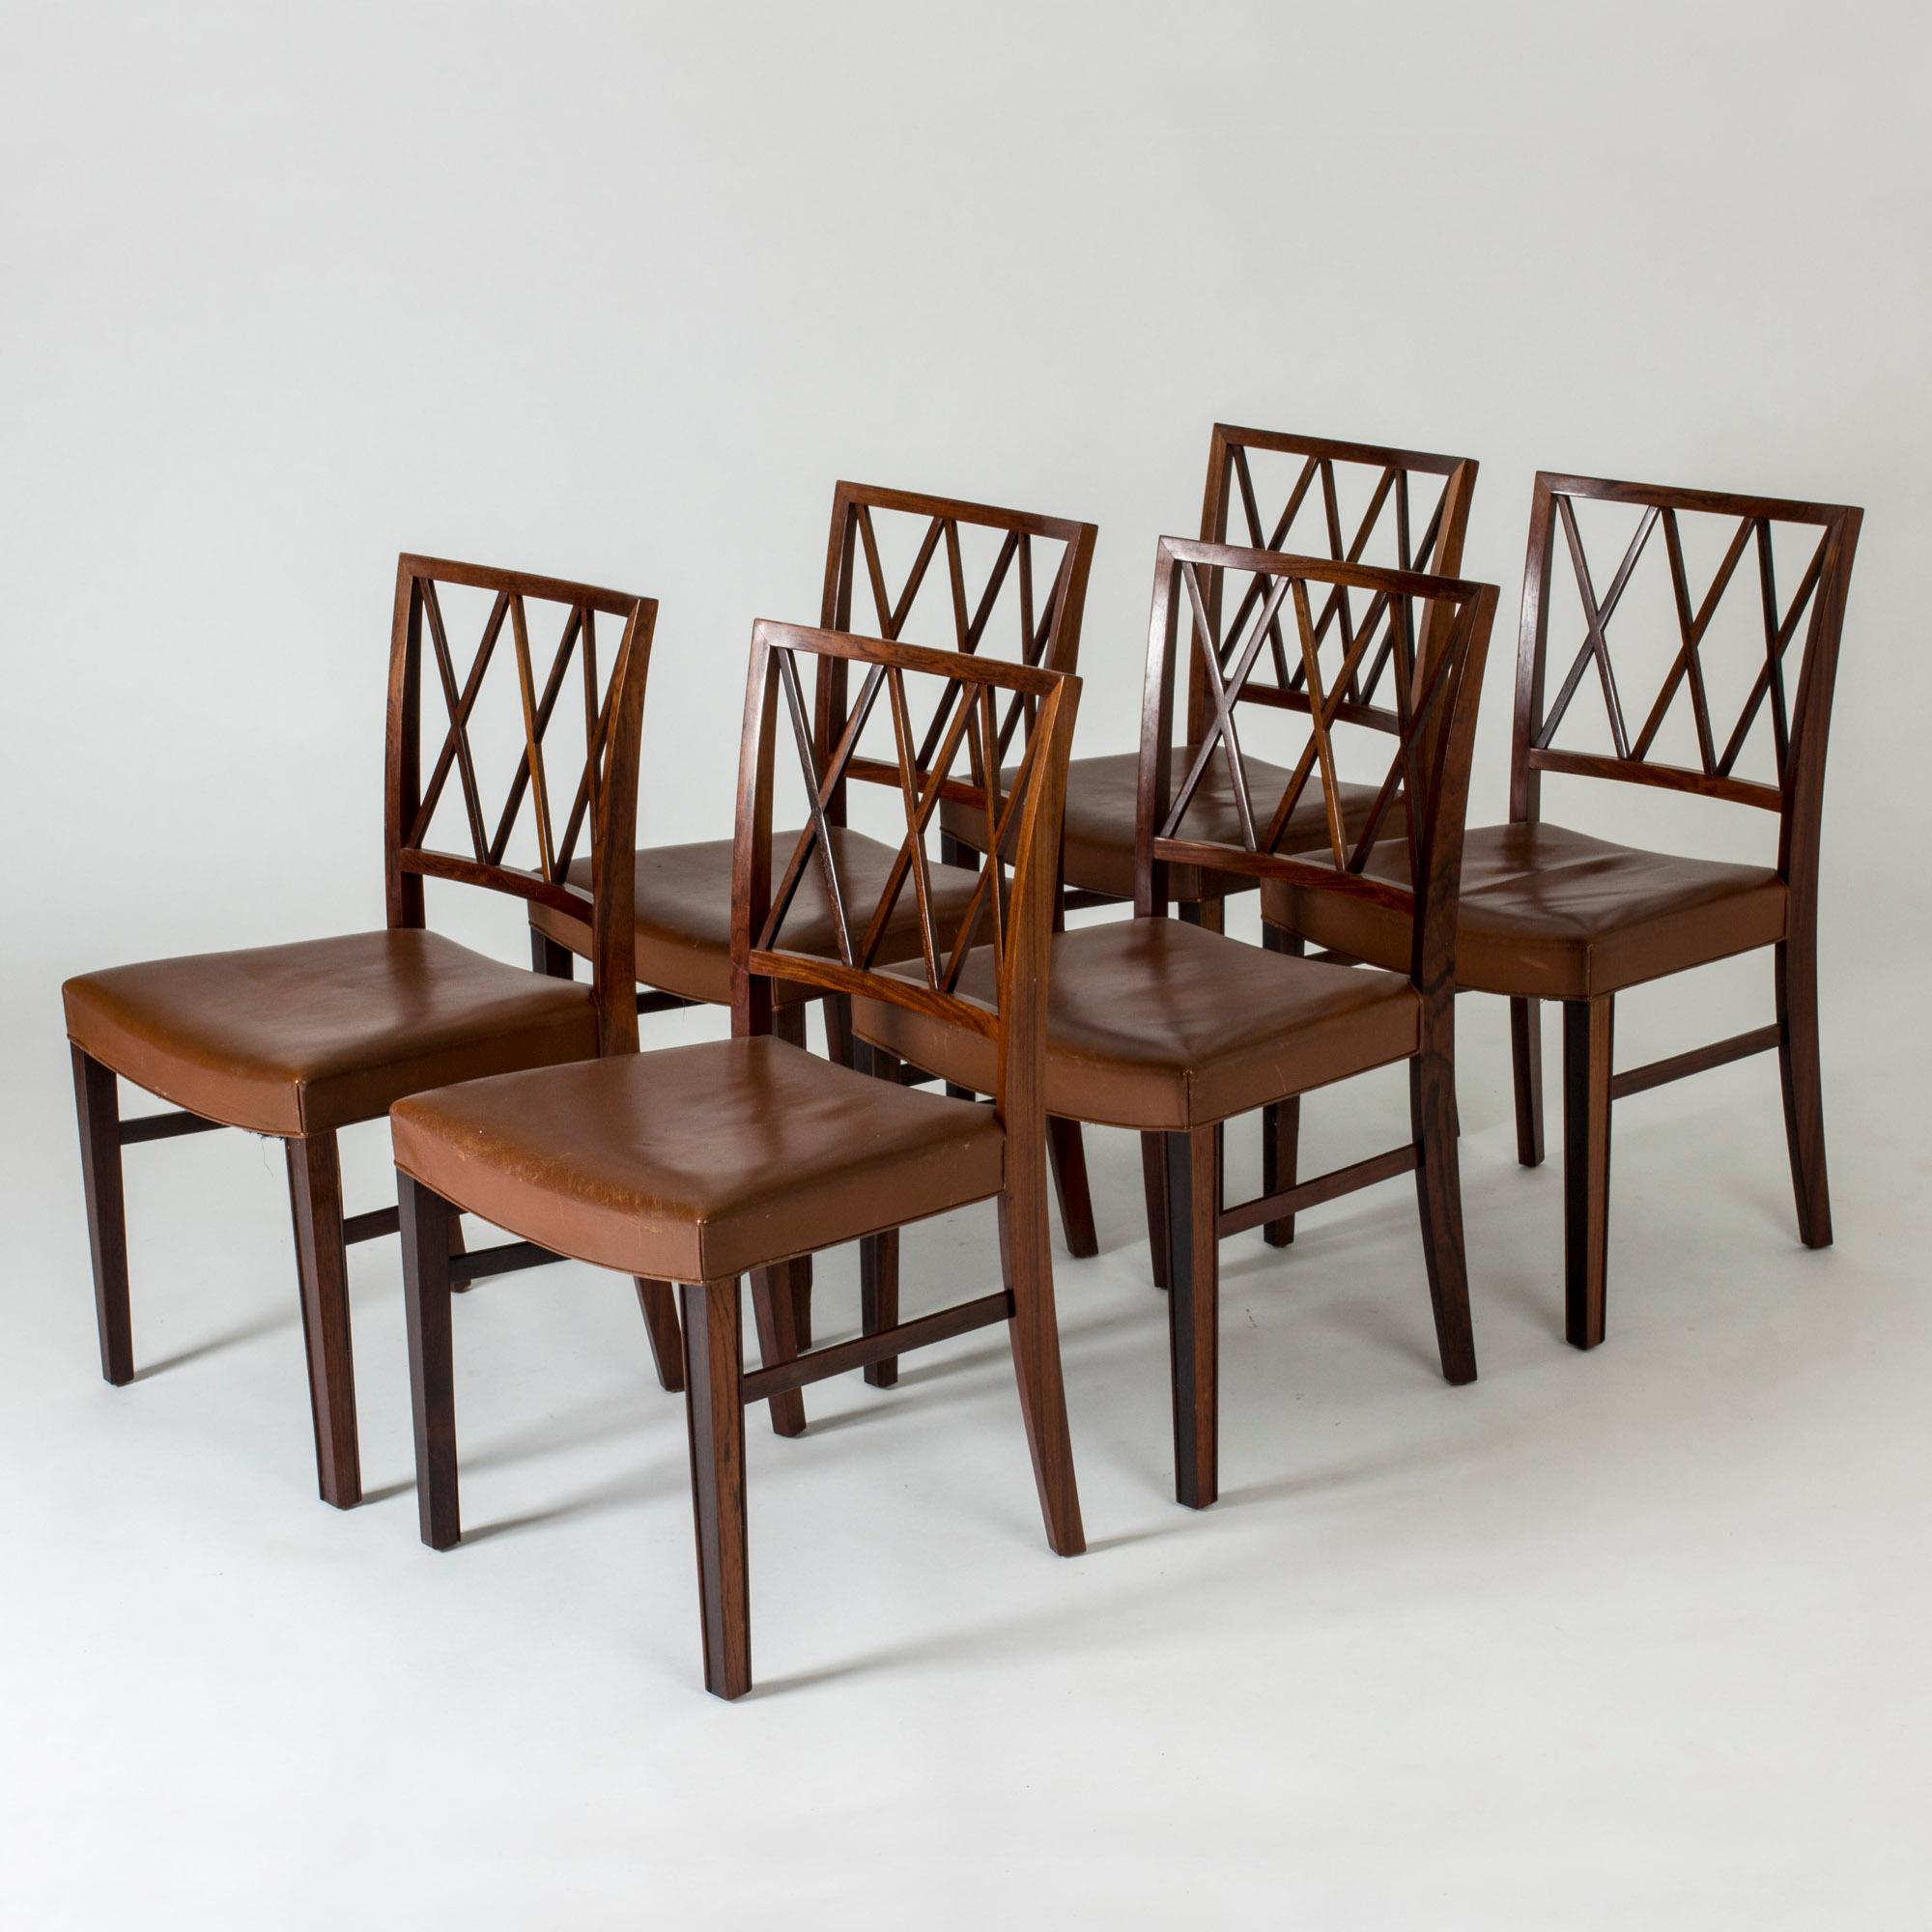 Set of four beautiful dining chairs by Ole Wanscher. Made from rosewood with striking backs with a crossed pattern. Brown leather seats.